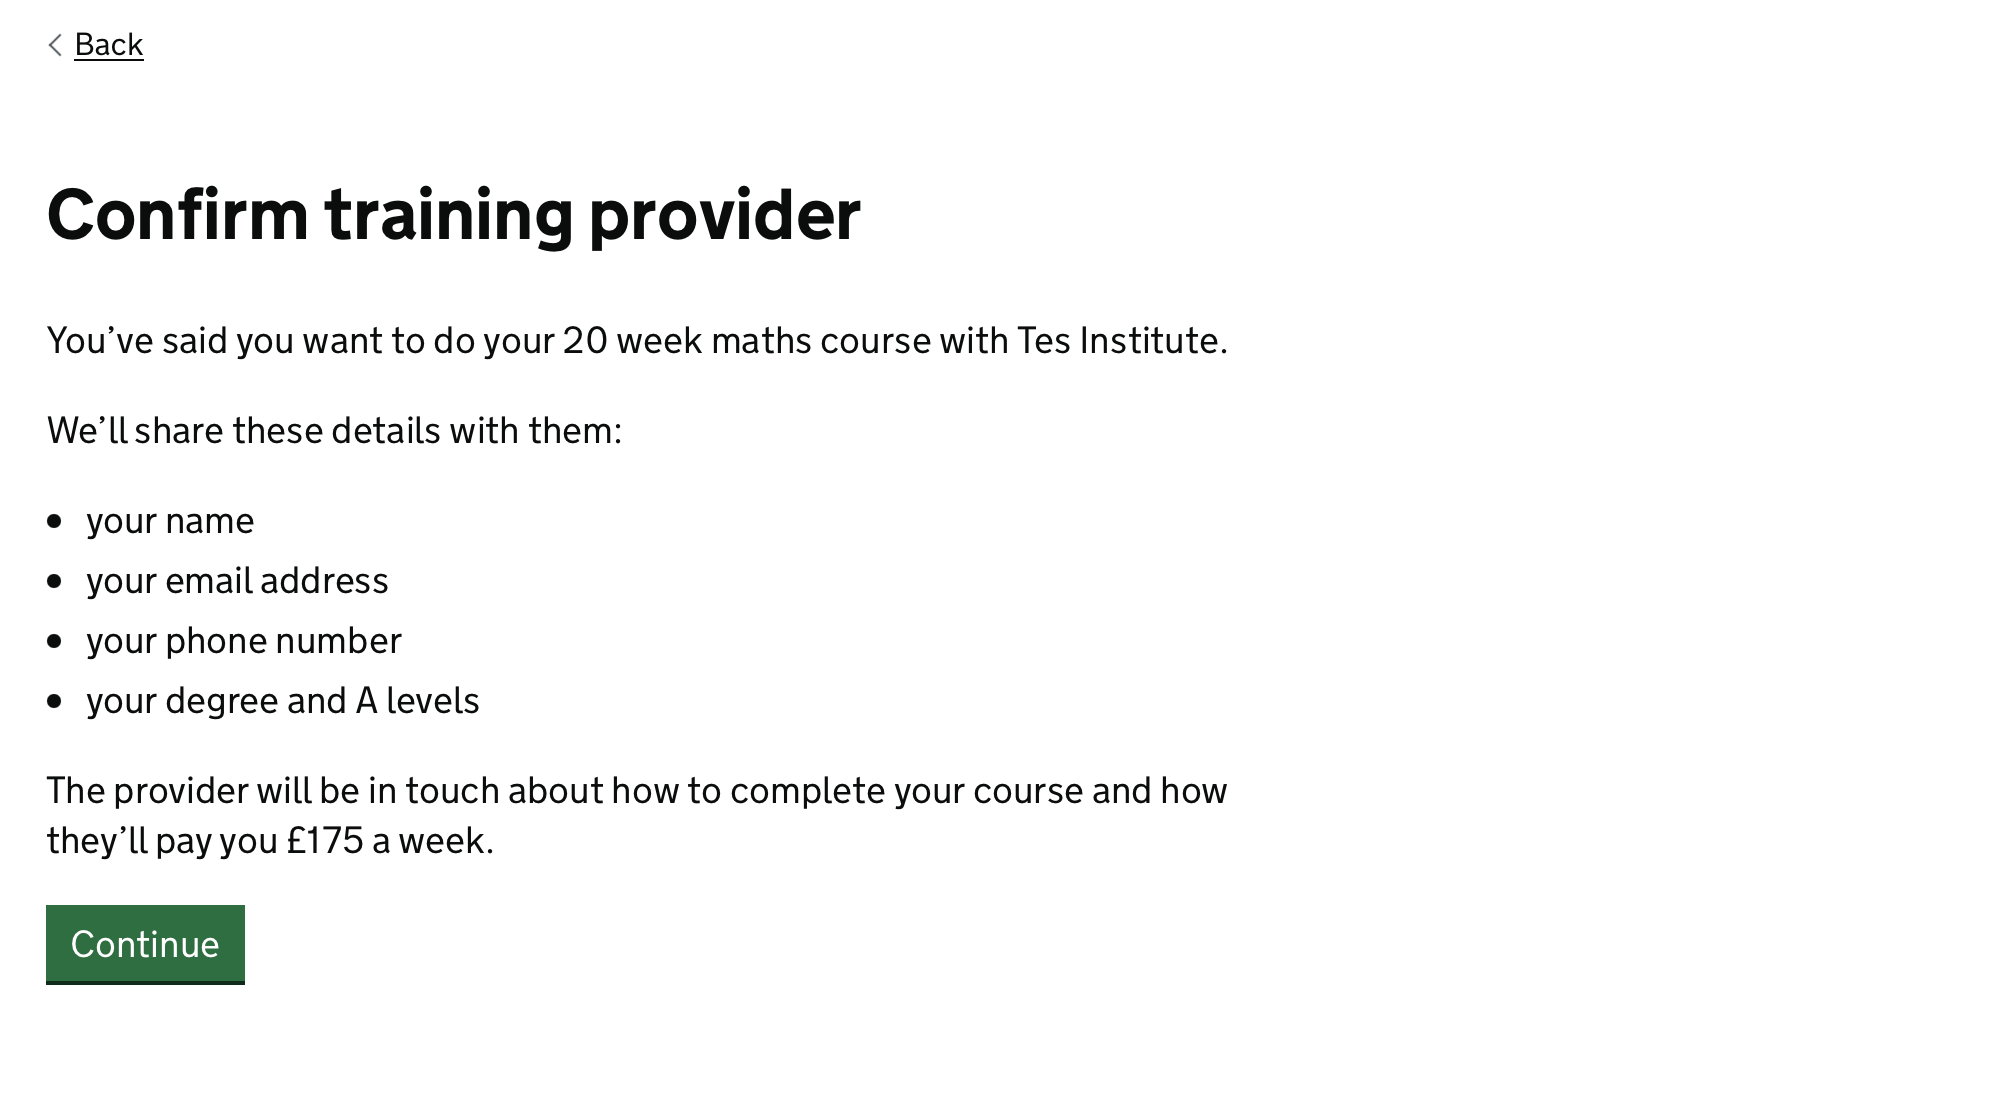 Screenshot with the heading 'Confirm training provider'. This is followed by content tellng the user what information we will share with the SKE provider which includes their name, email address, phone number and degree and A levels. It then says the provider will contact the user followed by a green 'Continue' button.